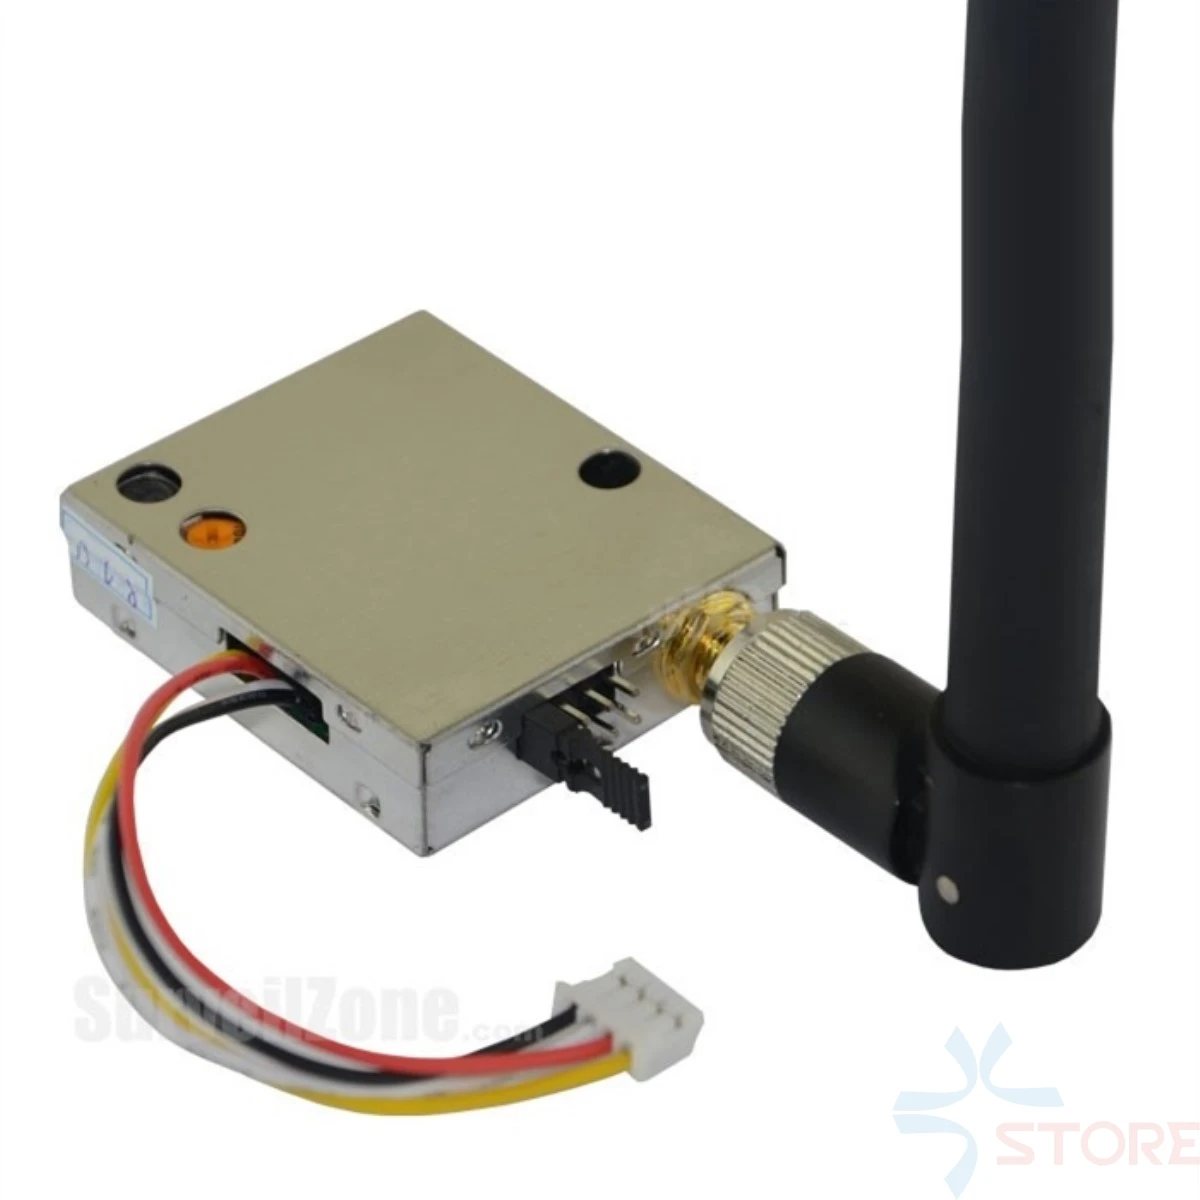 1.2Ghz/1.3Ghz100mw Wireless Audio Video transceiver and receiver TX/RX combo for FPV 3